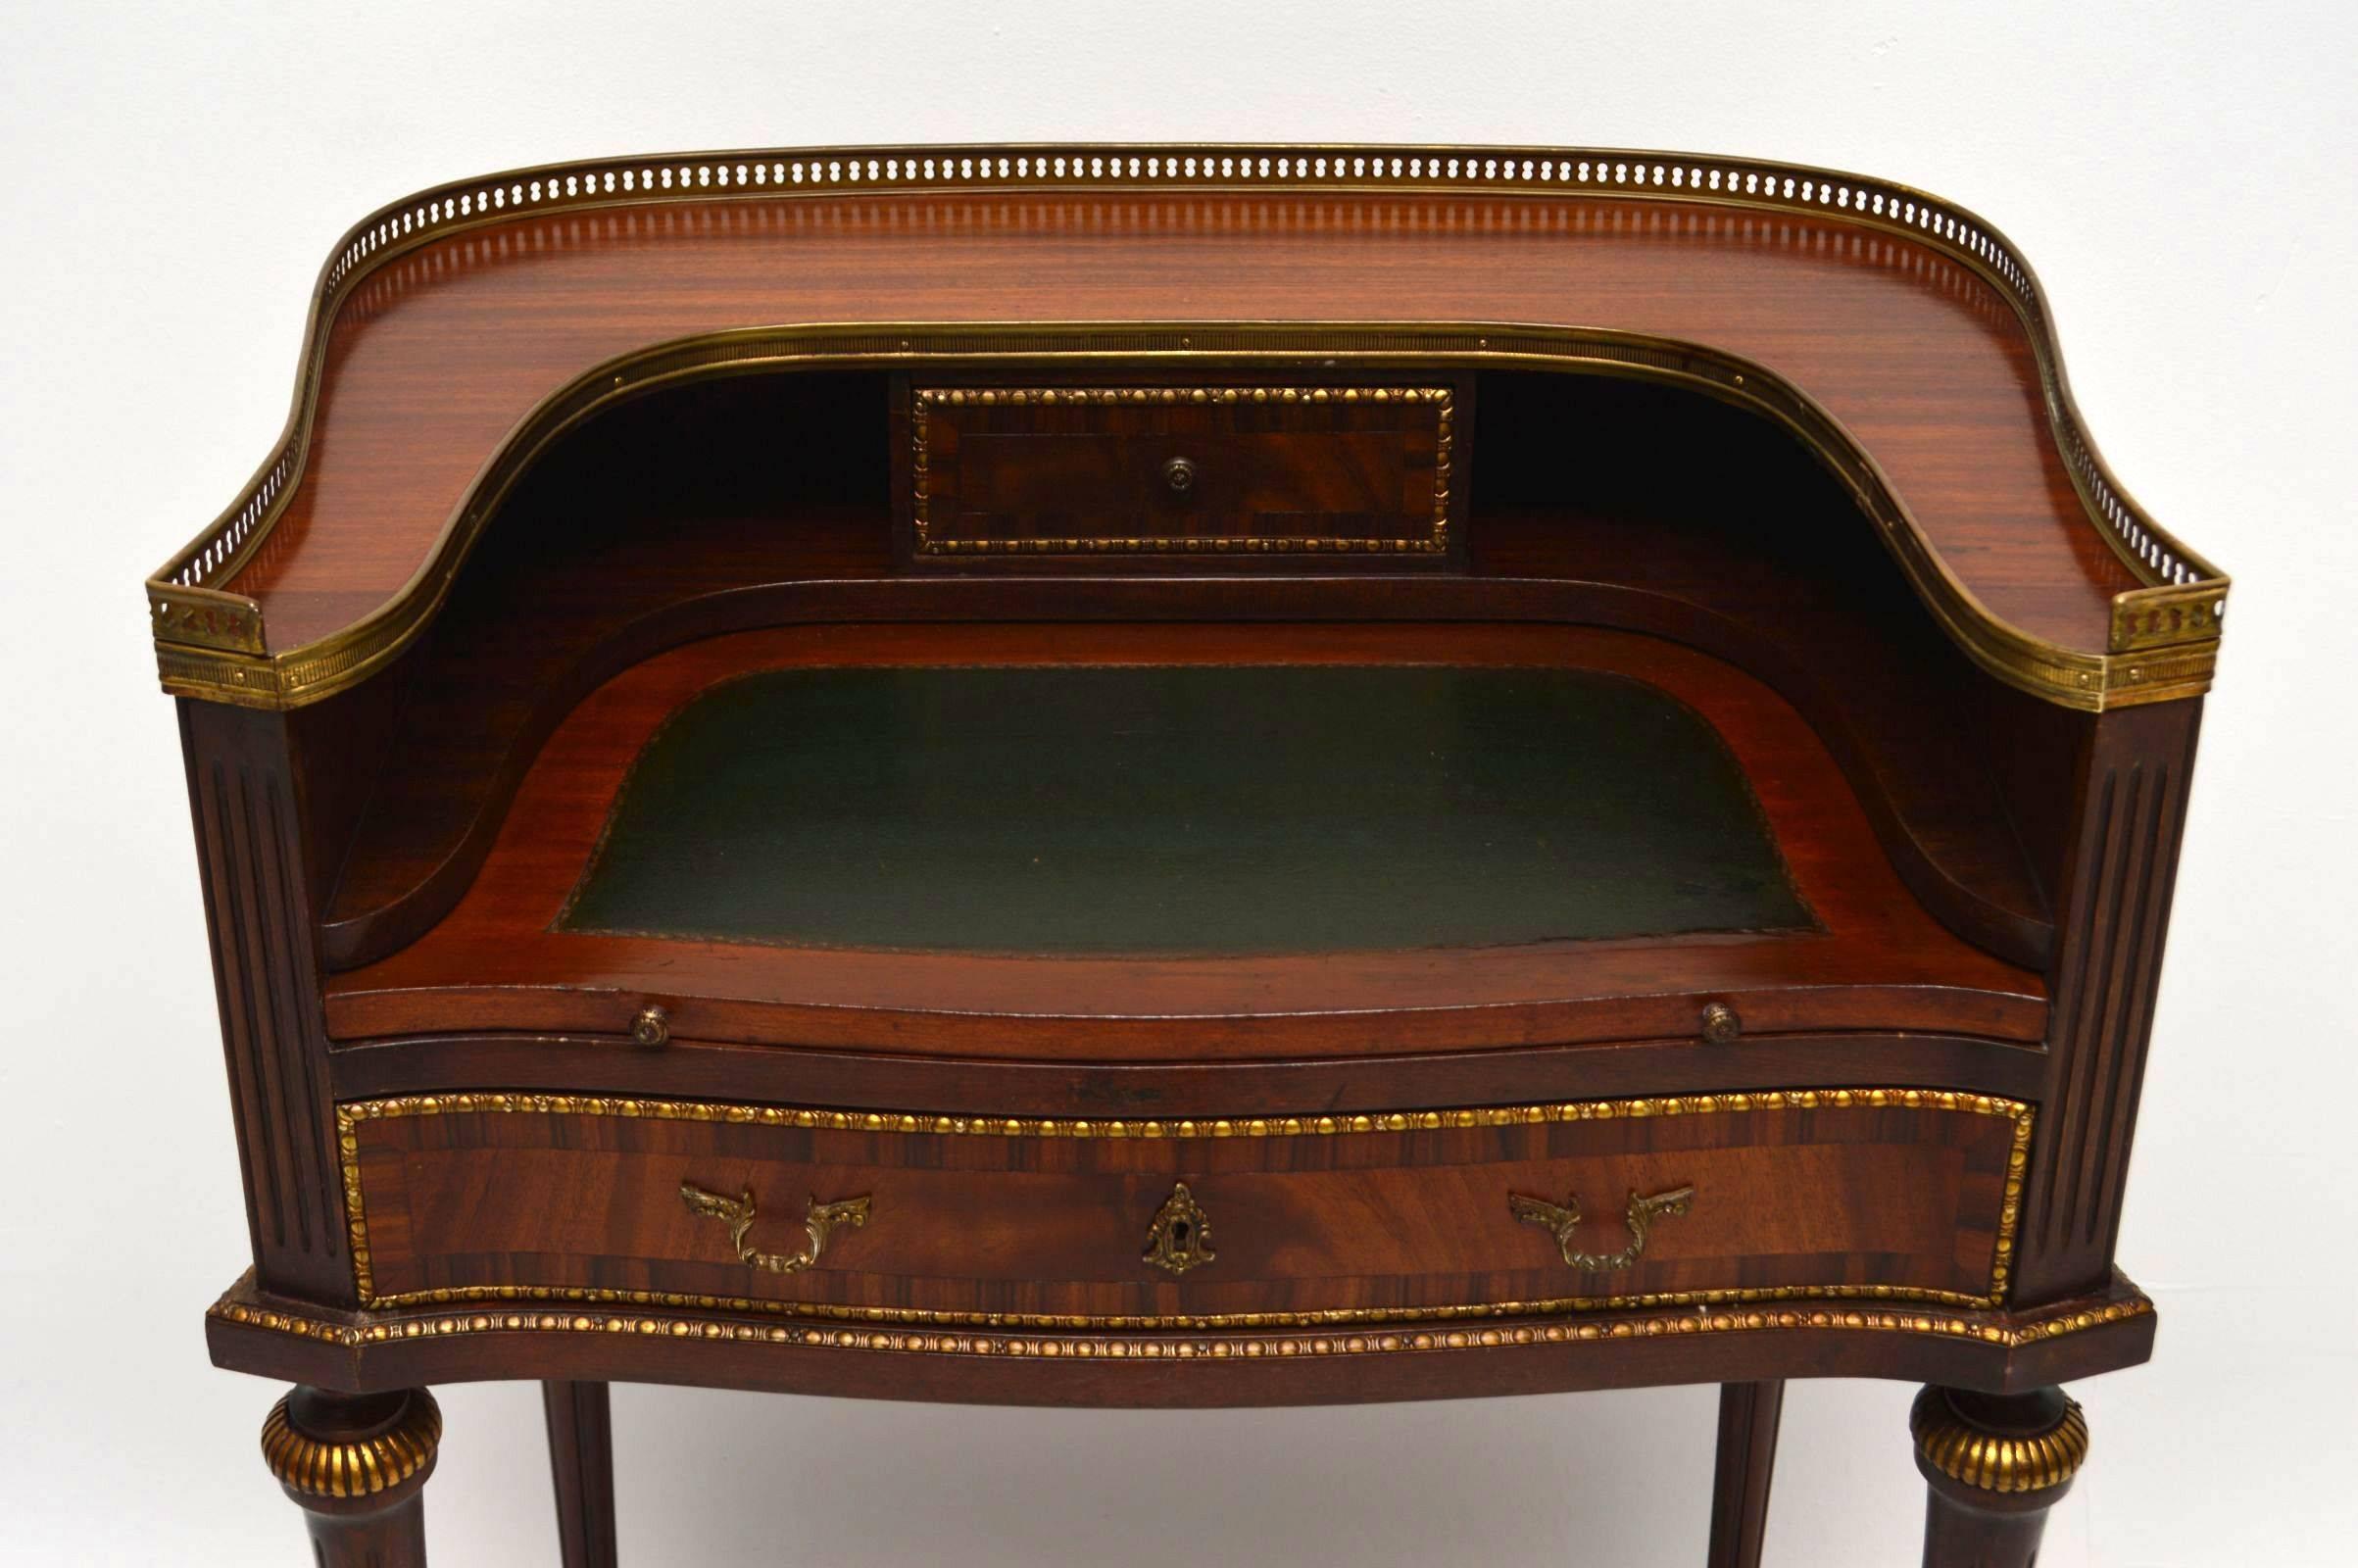 Antique French mahogany writing table with an interestingly shaped top section that runs all the way around it. It has a pierced gilt metal top gallery and gilt metal mounts handles and feet. This desk has many nice features, including reeded